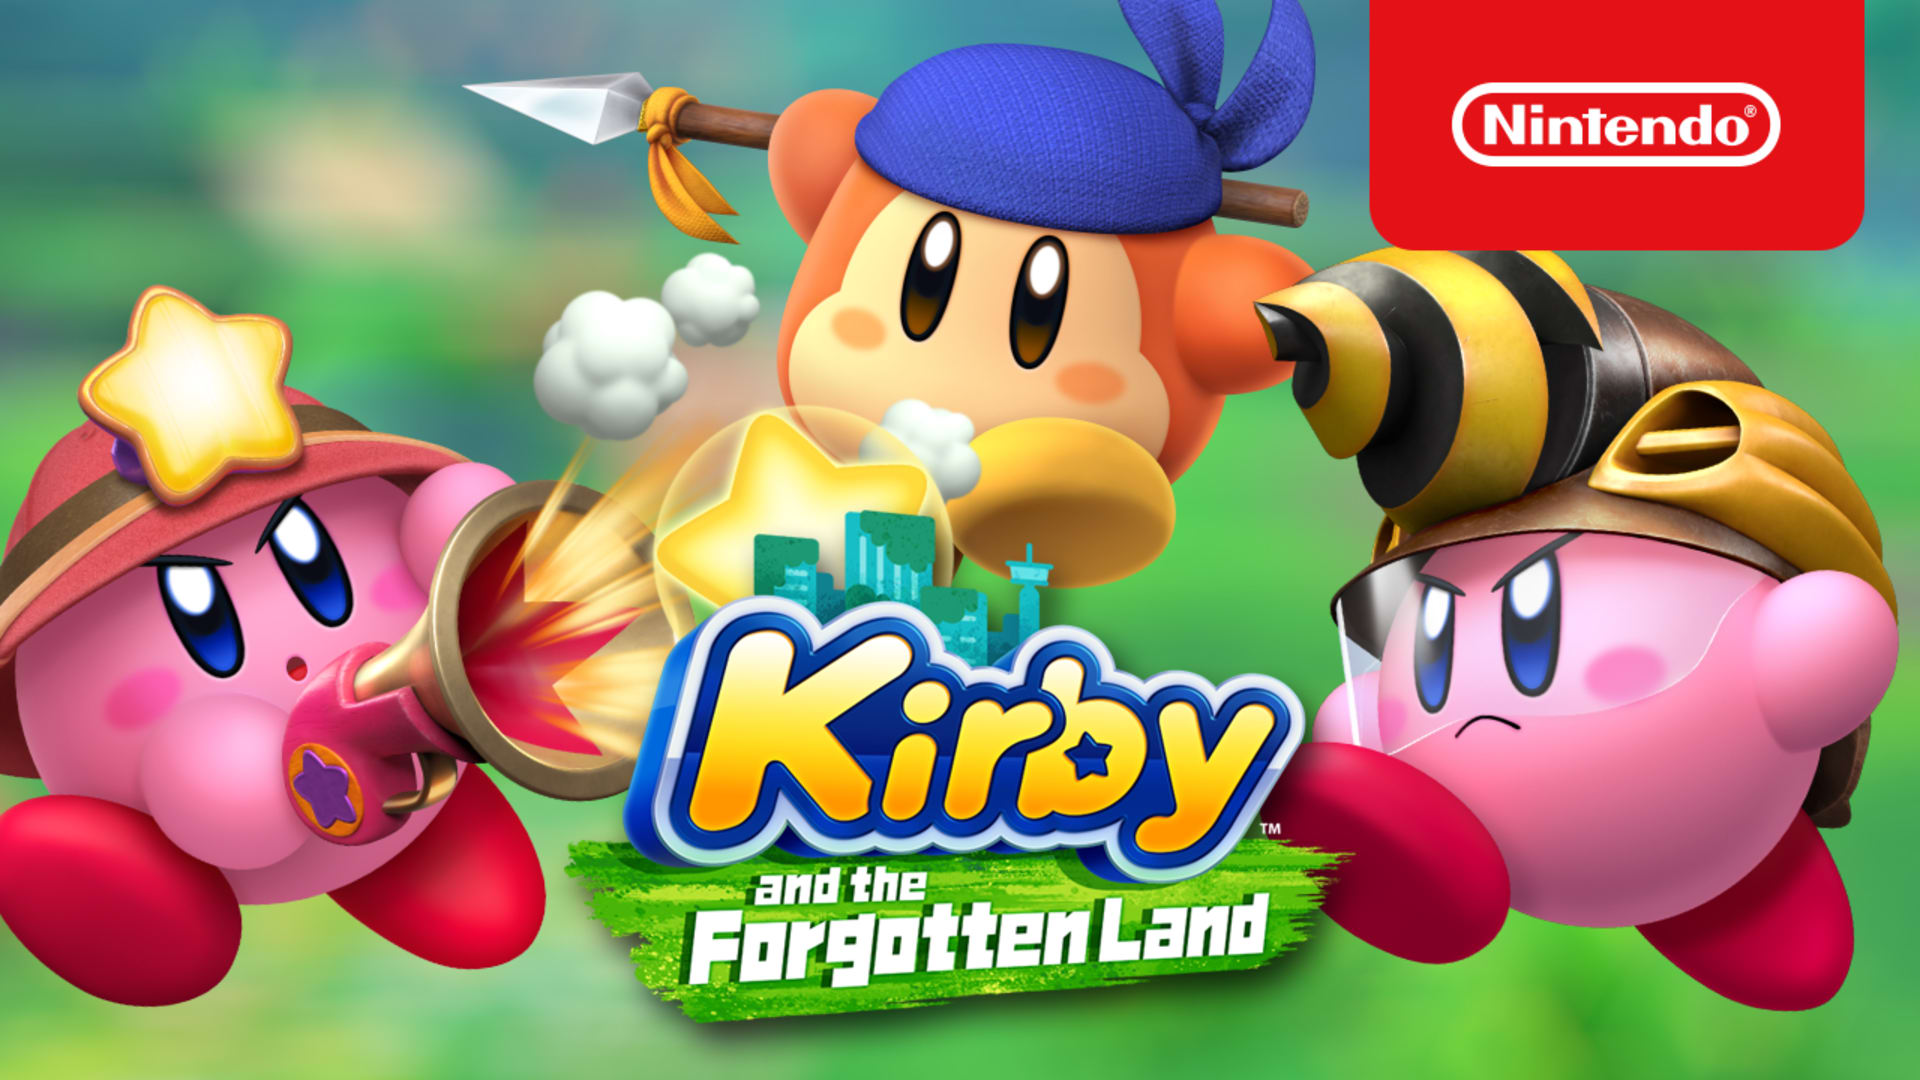 Kirby and the Forgotten Land': Every Free Present Code in Waddle